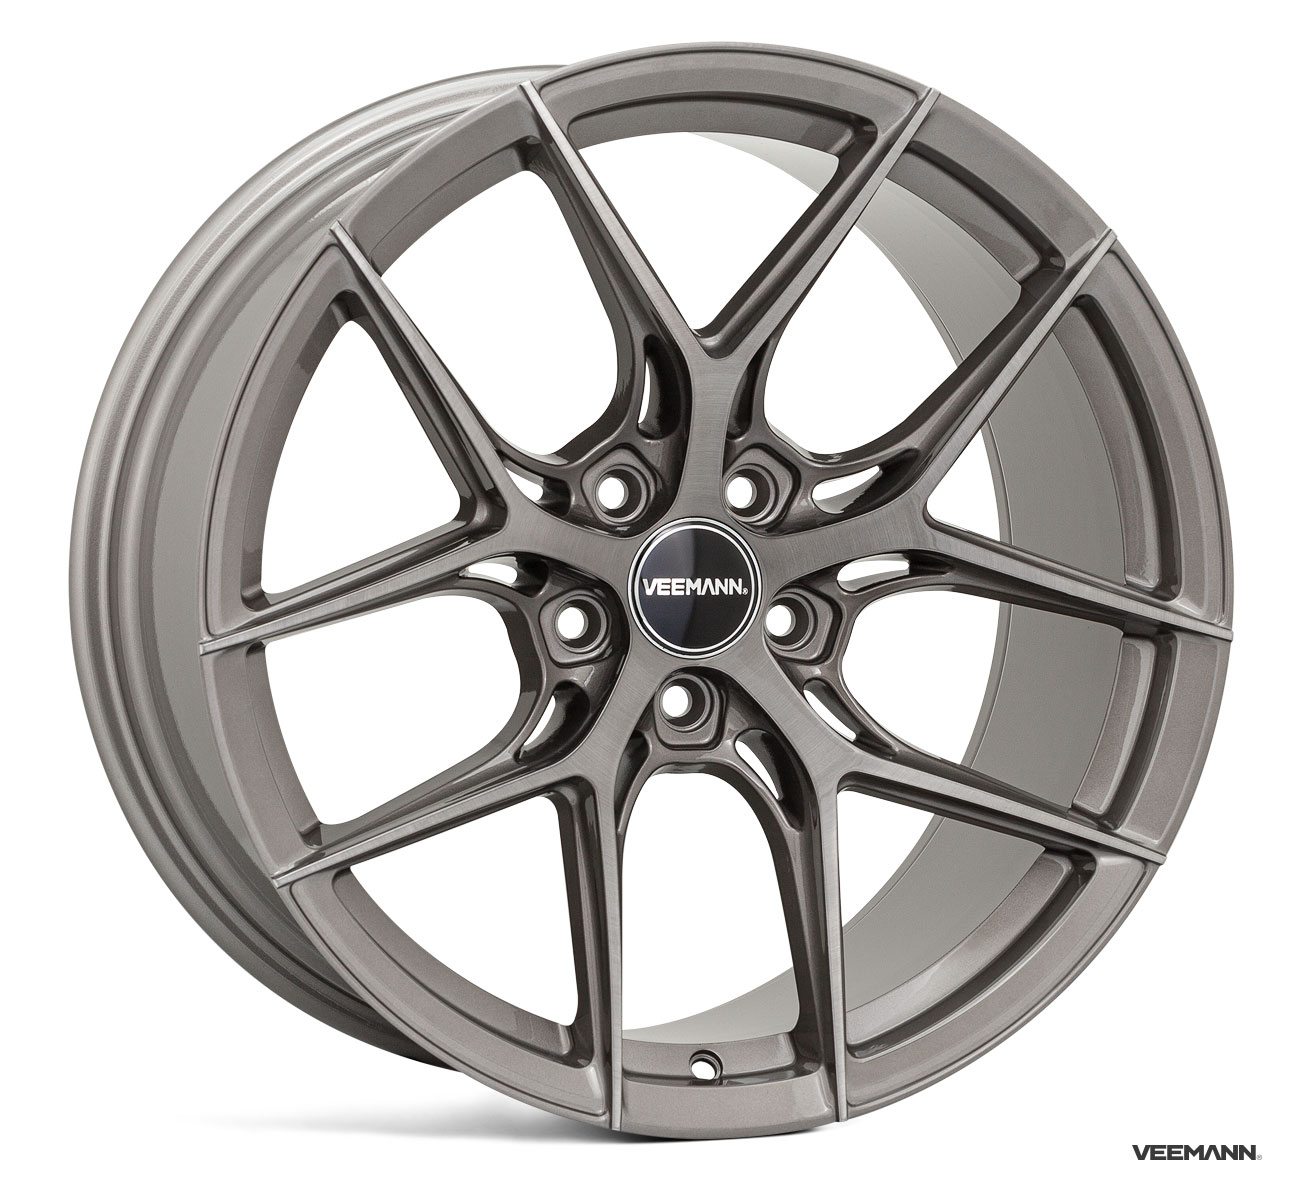 NEW 20" VEEMANN VC580R ALLOY WHEELS IN CARBON MACHINED WITH WIDER 10.5" REARS